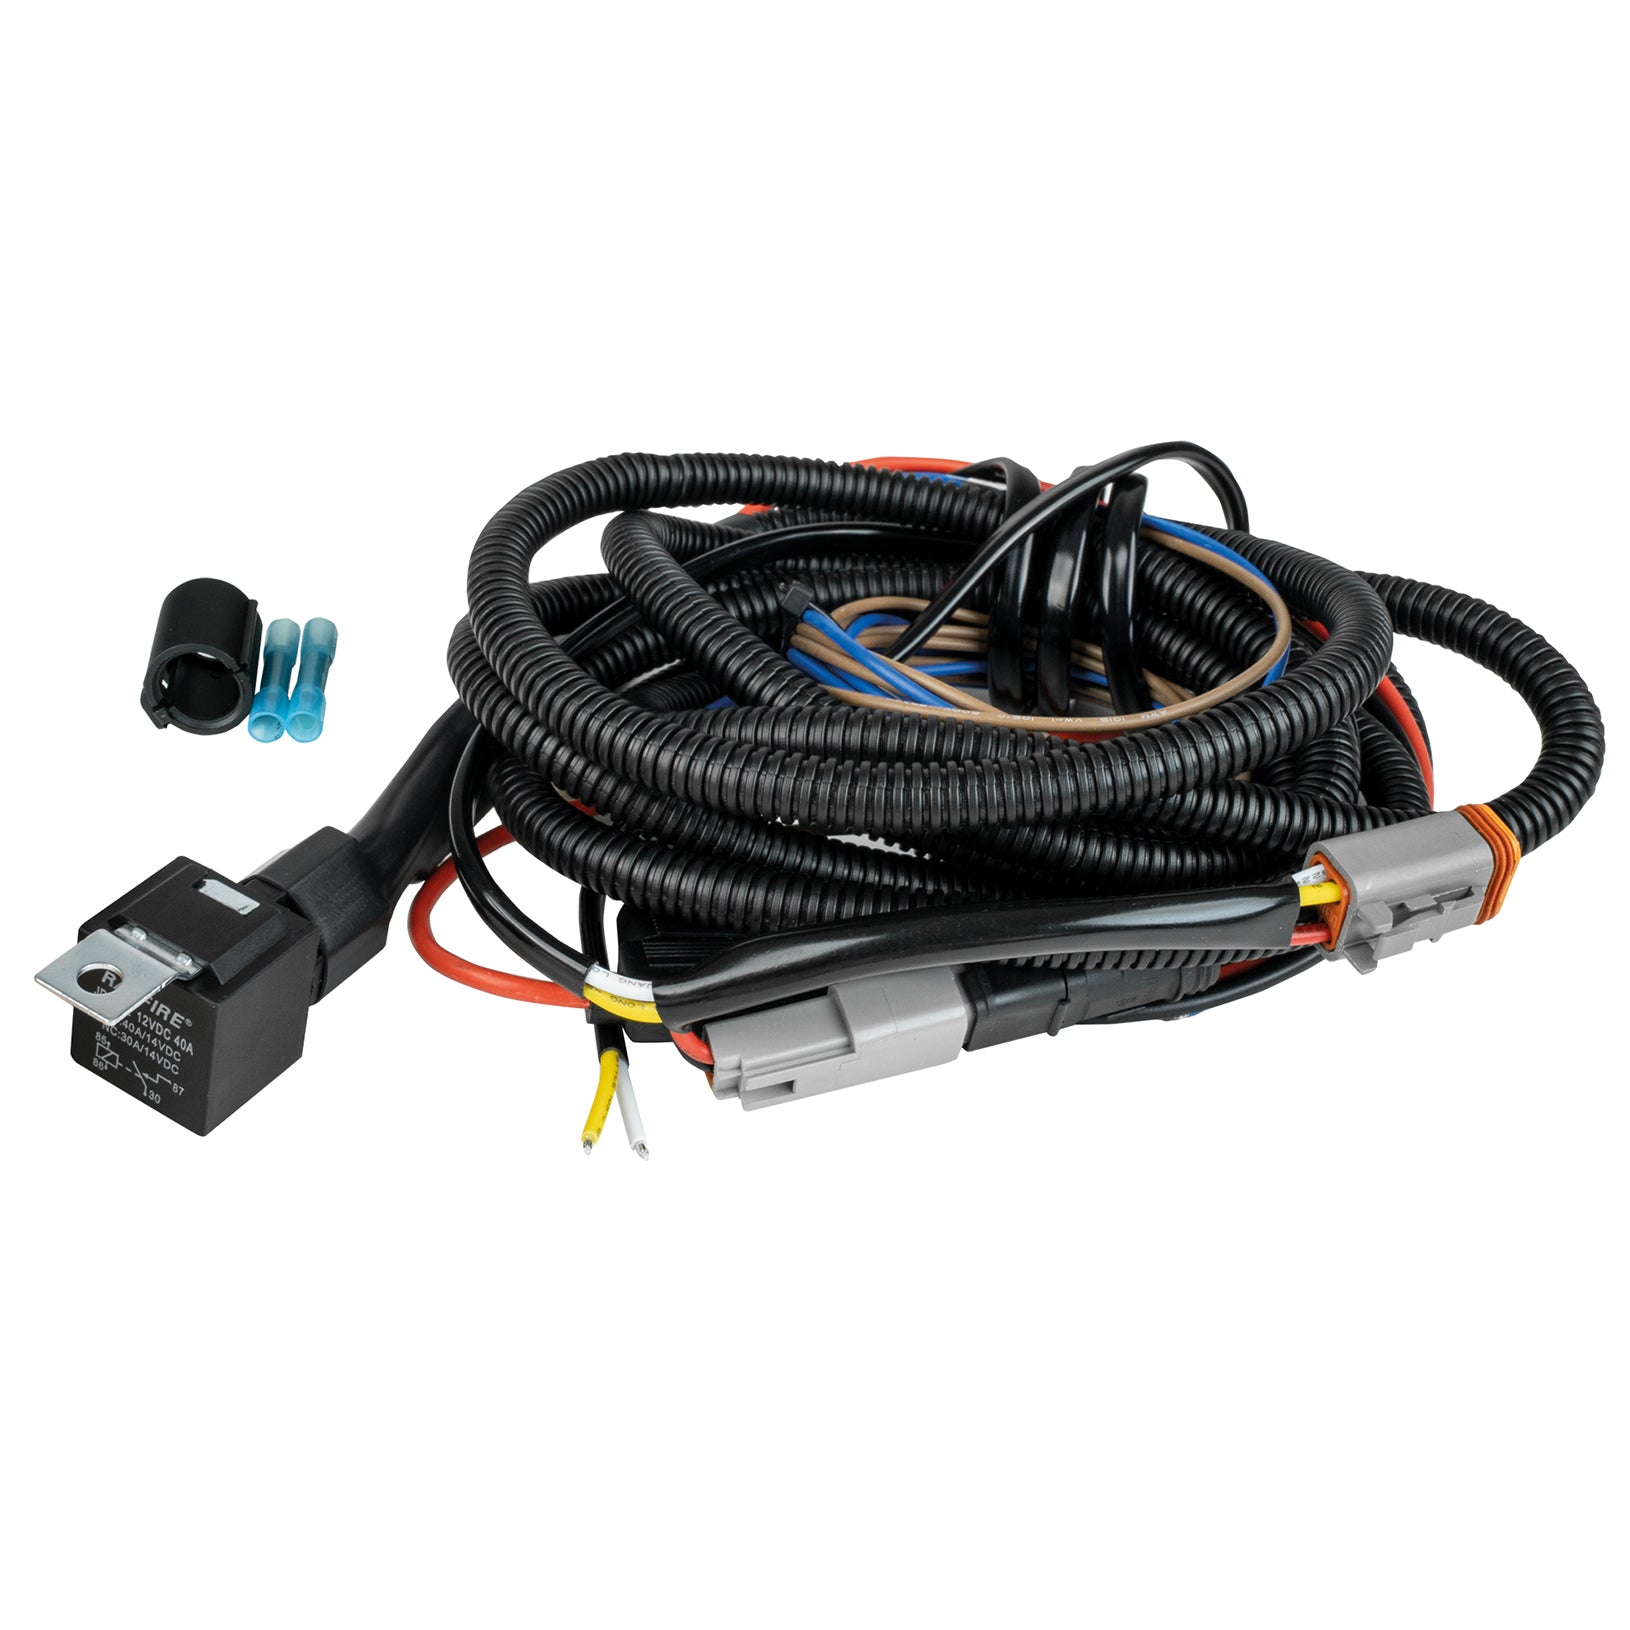 Strands Siberia Pro Cable Kit / 1x DT Connector - spo-cs-disabled - spo-default - spo-disabled - spo-notify-me-disabled